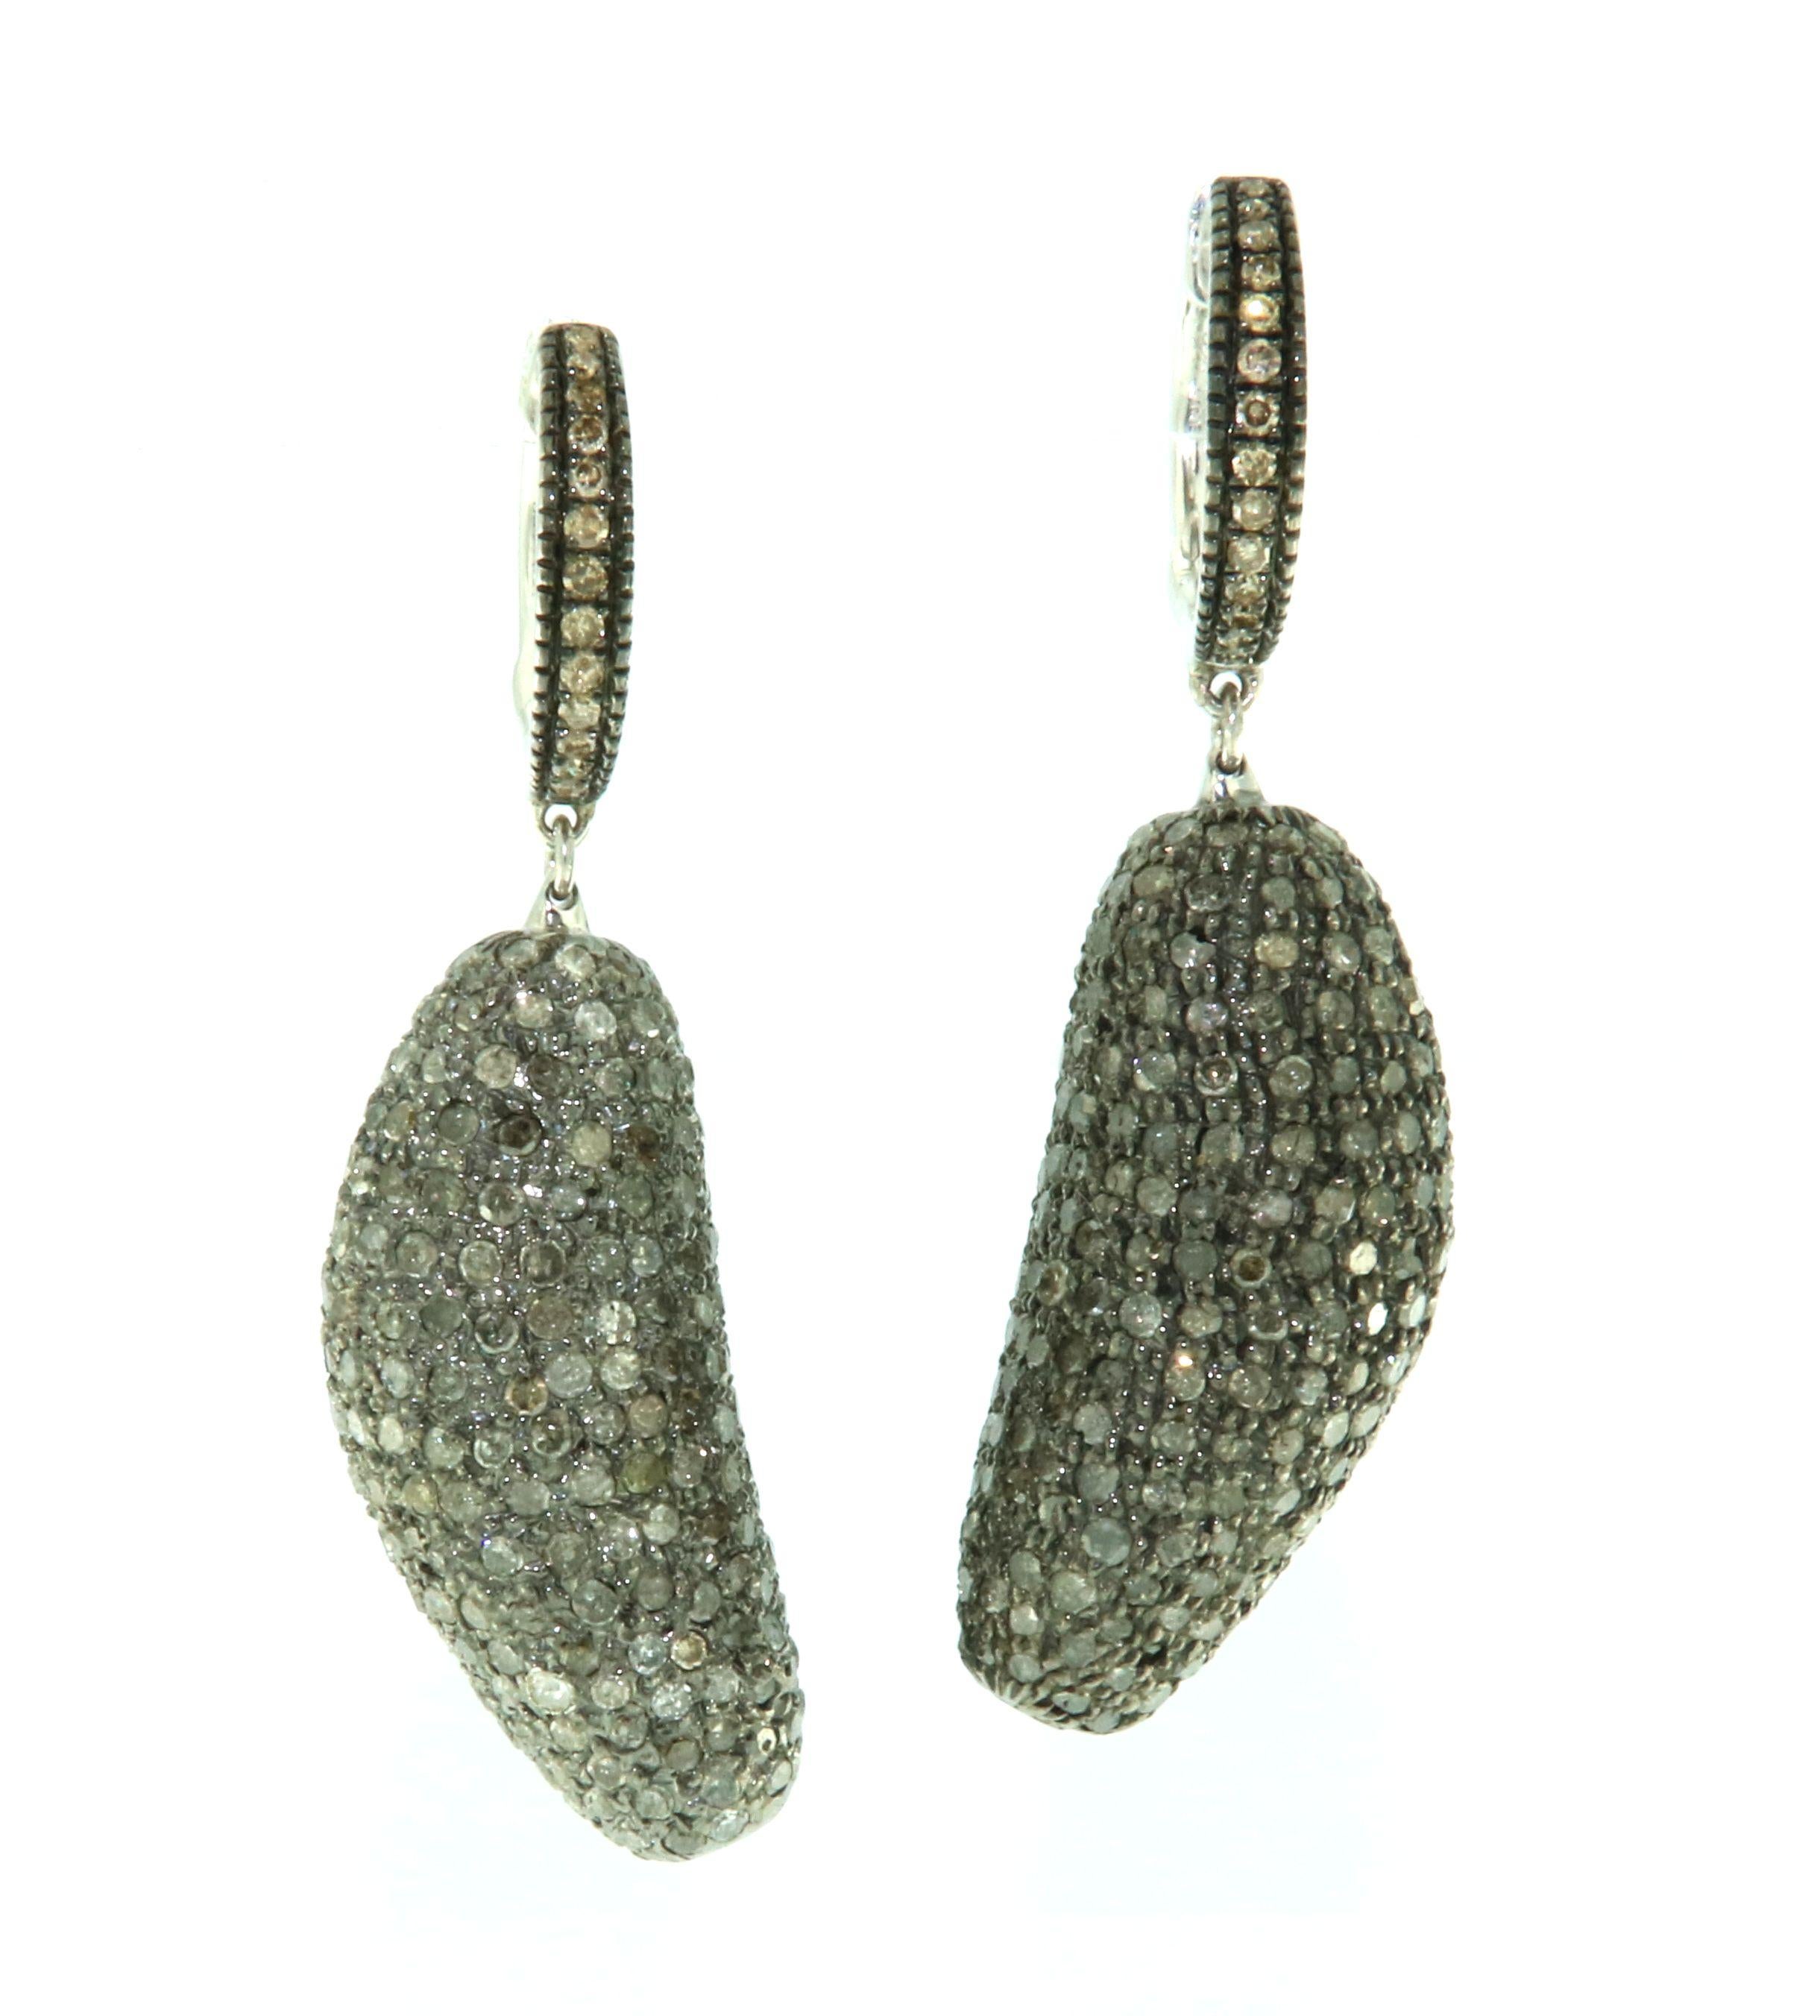 Mixed Cut Nugget Shaped Pave Diamond Dangle Earrings Made in 18k Gold & Silver For Sale